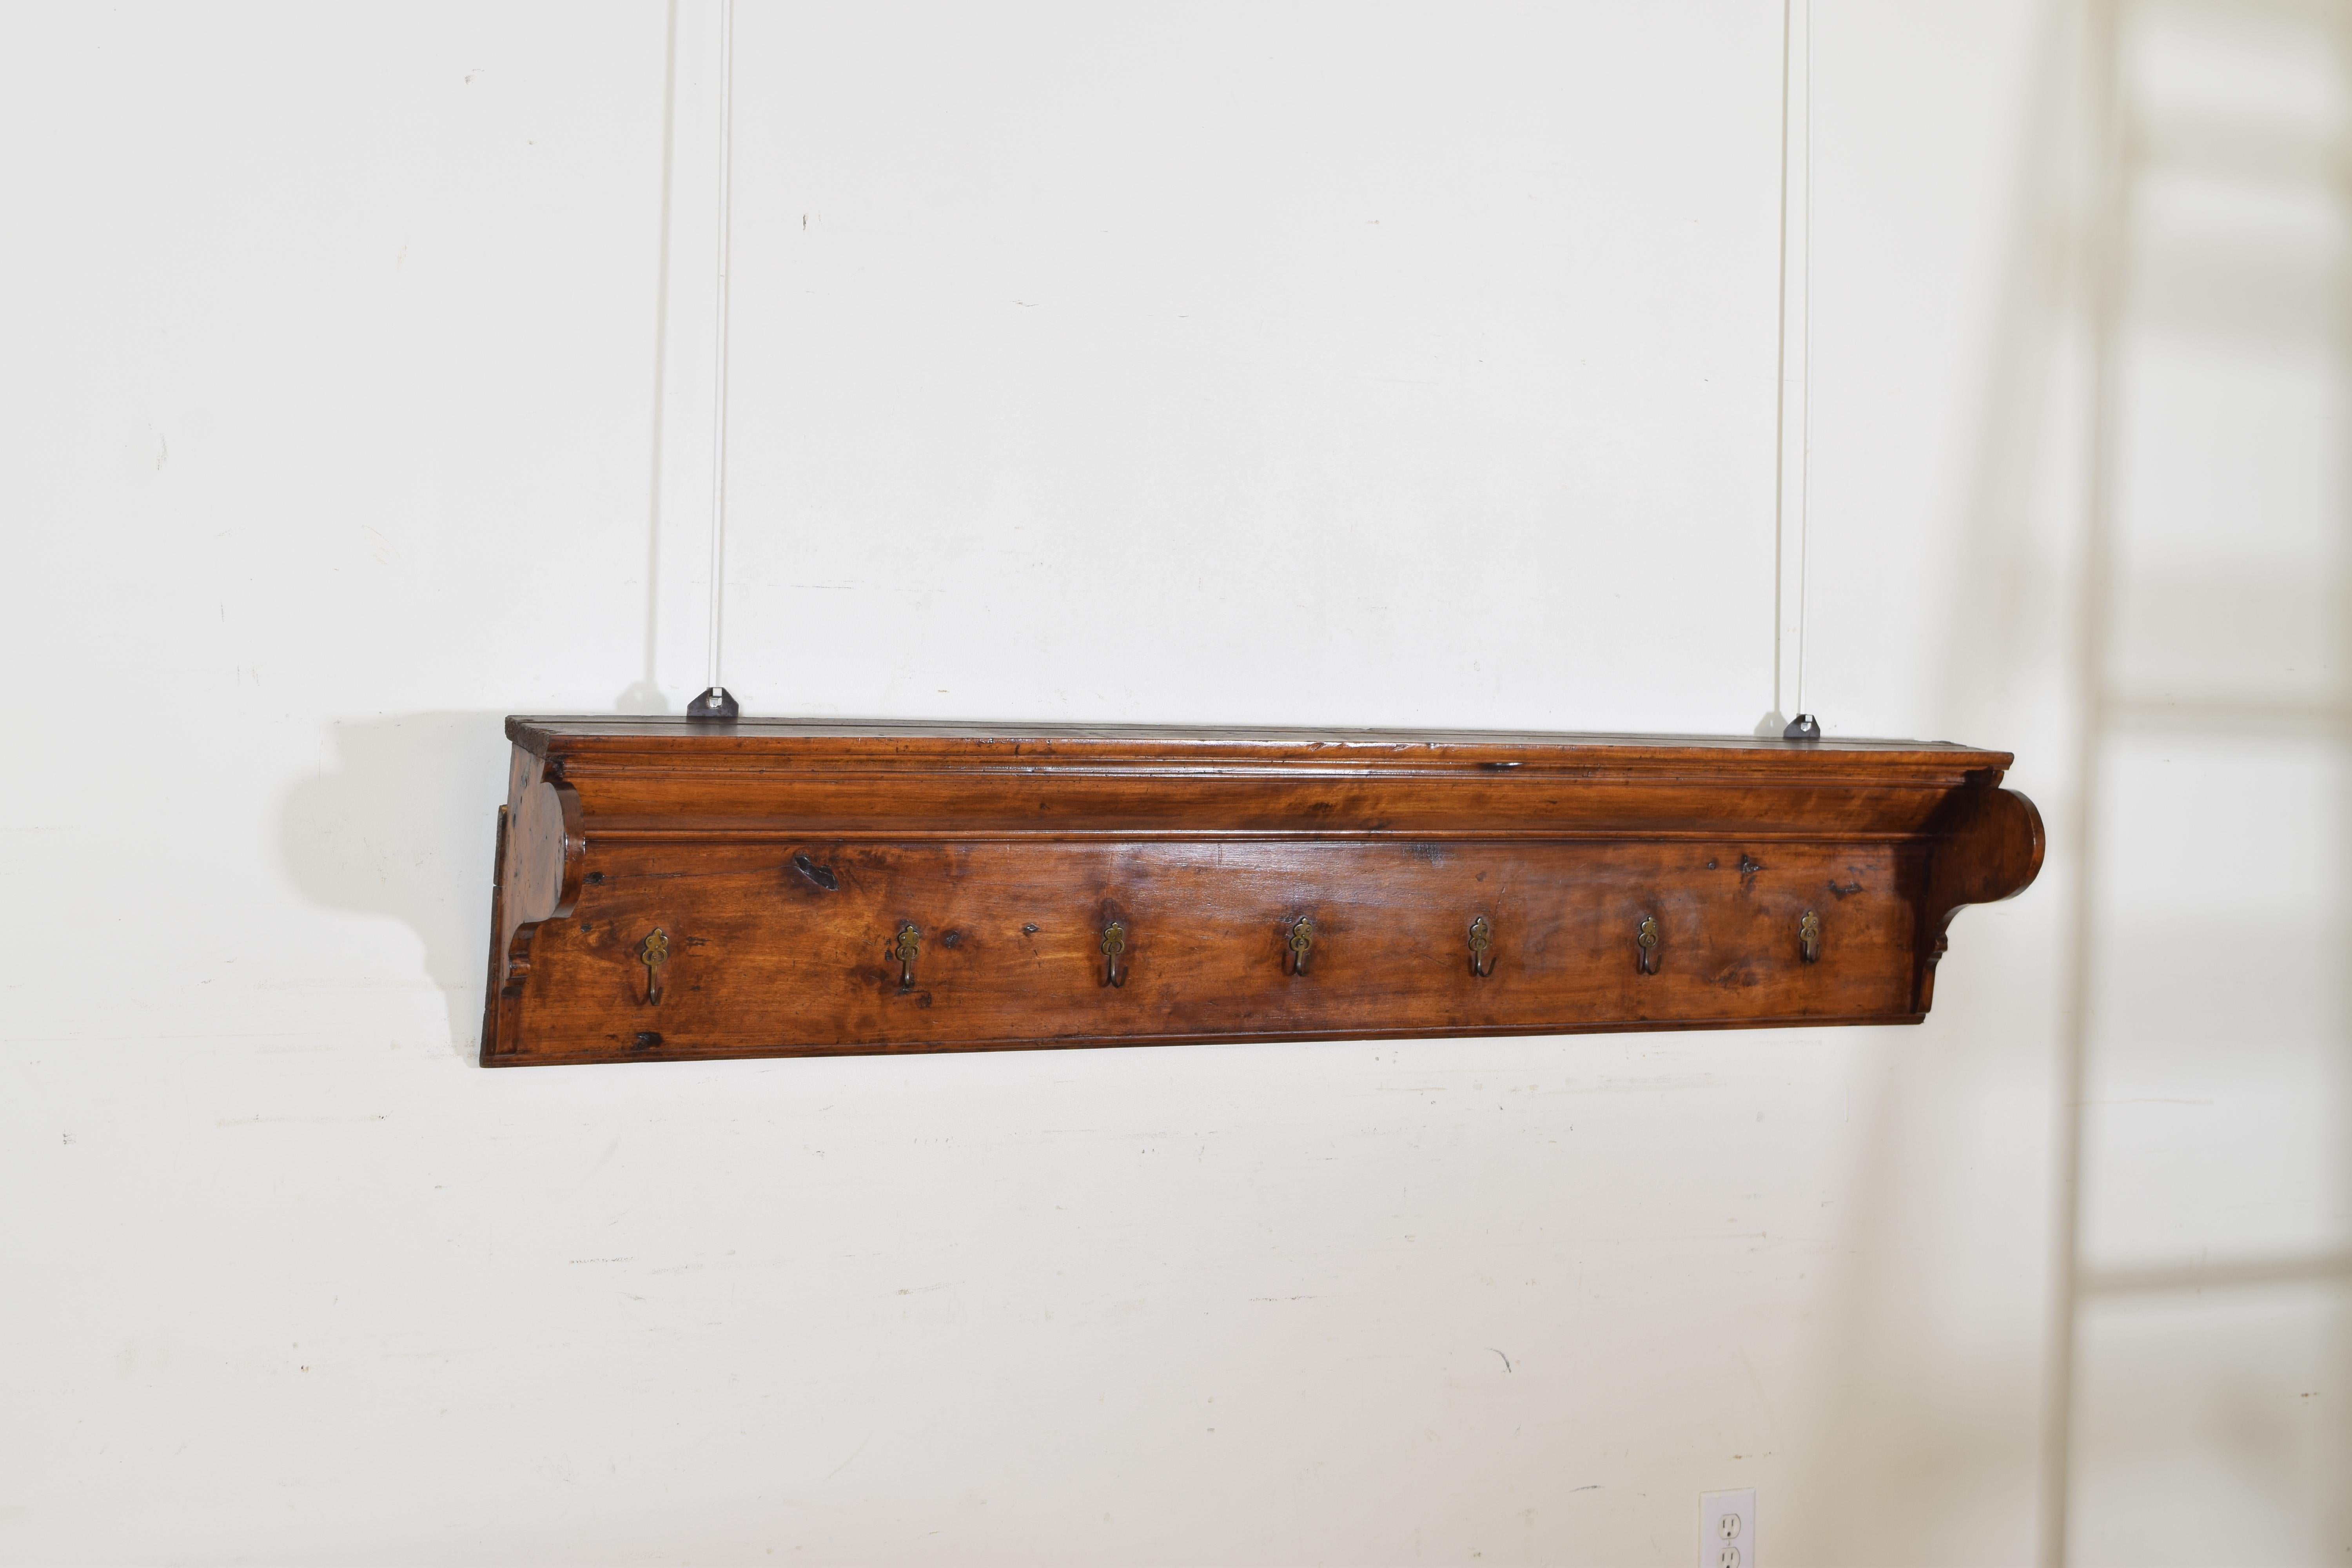 The upper flat surface with a channel for holding plates against a wall, the shaped sides flanking a molded vertical section, the lower portion with seven decoratively cast brass hanging hooks.